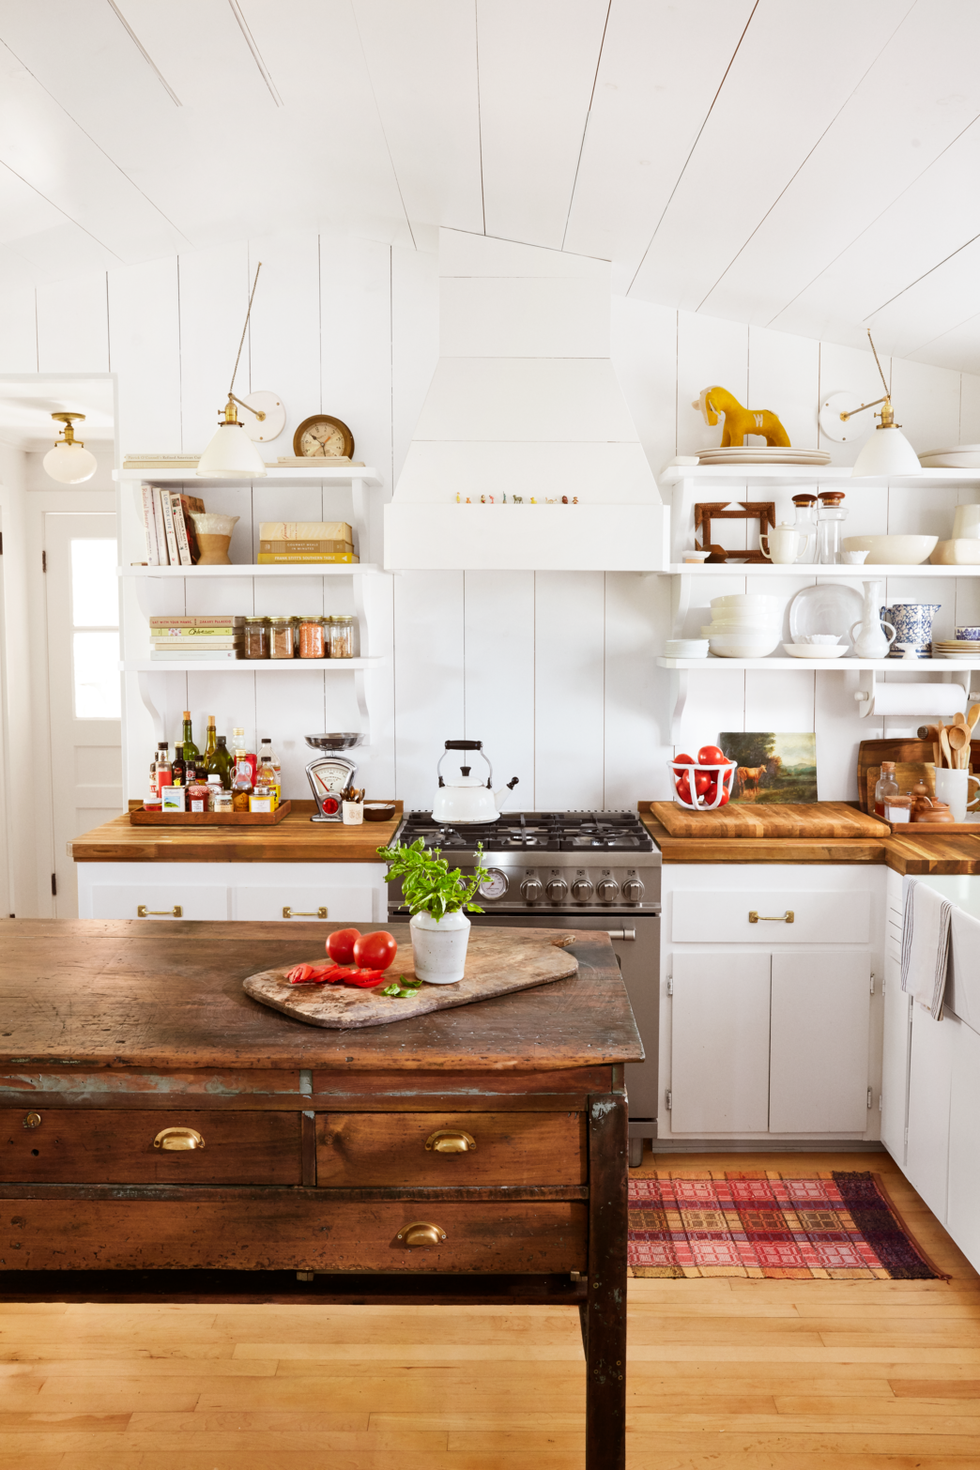 old wood printing press worktable repurposed as unique kitchen island in white shiplap kitchen with butcher block counters